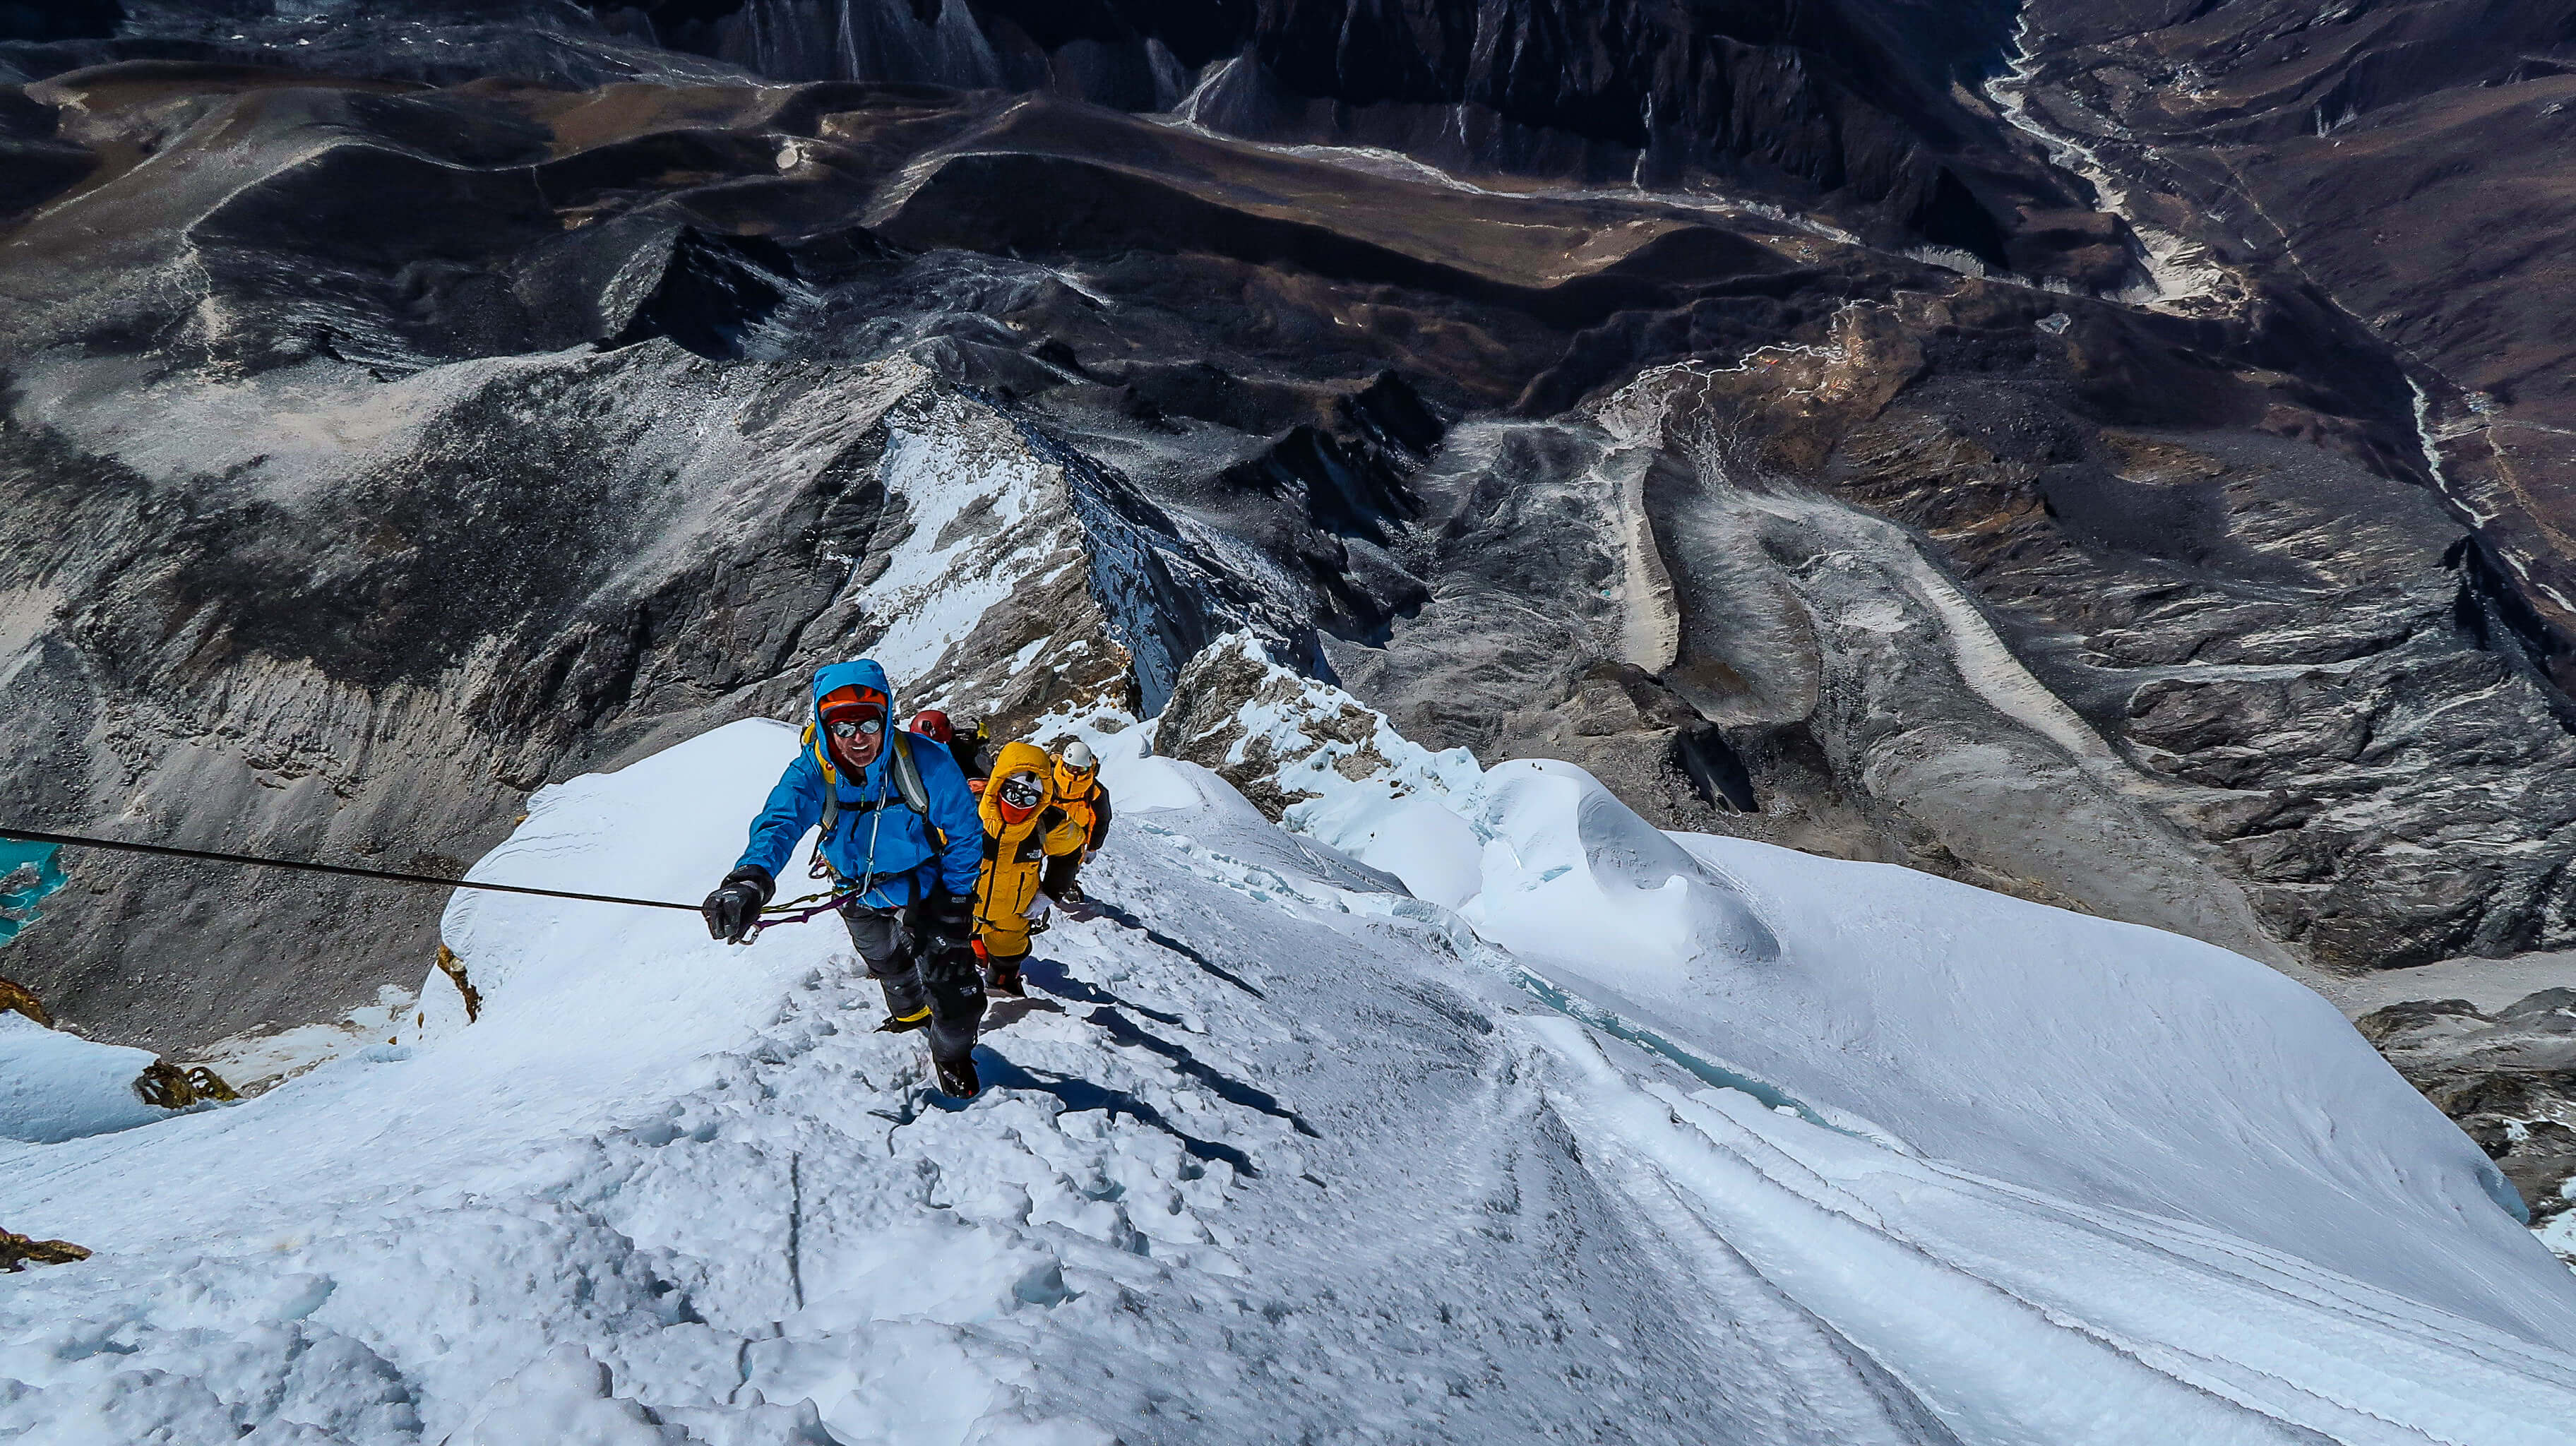 How To Prepare for Climbing Mount Everest Logistics and Physical Training